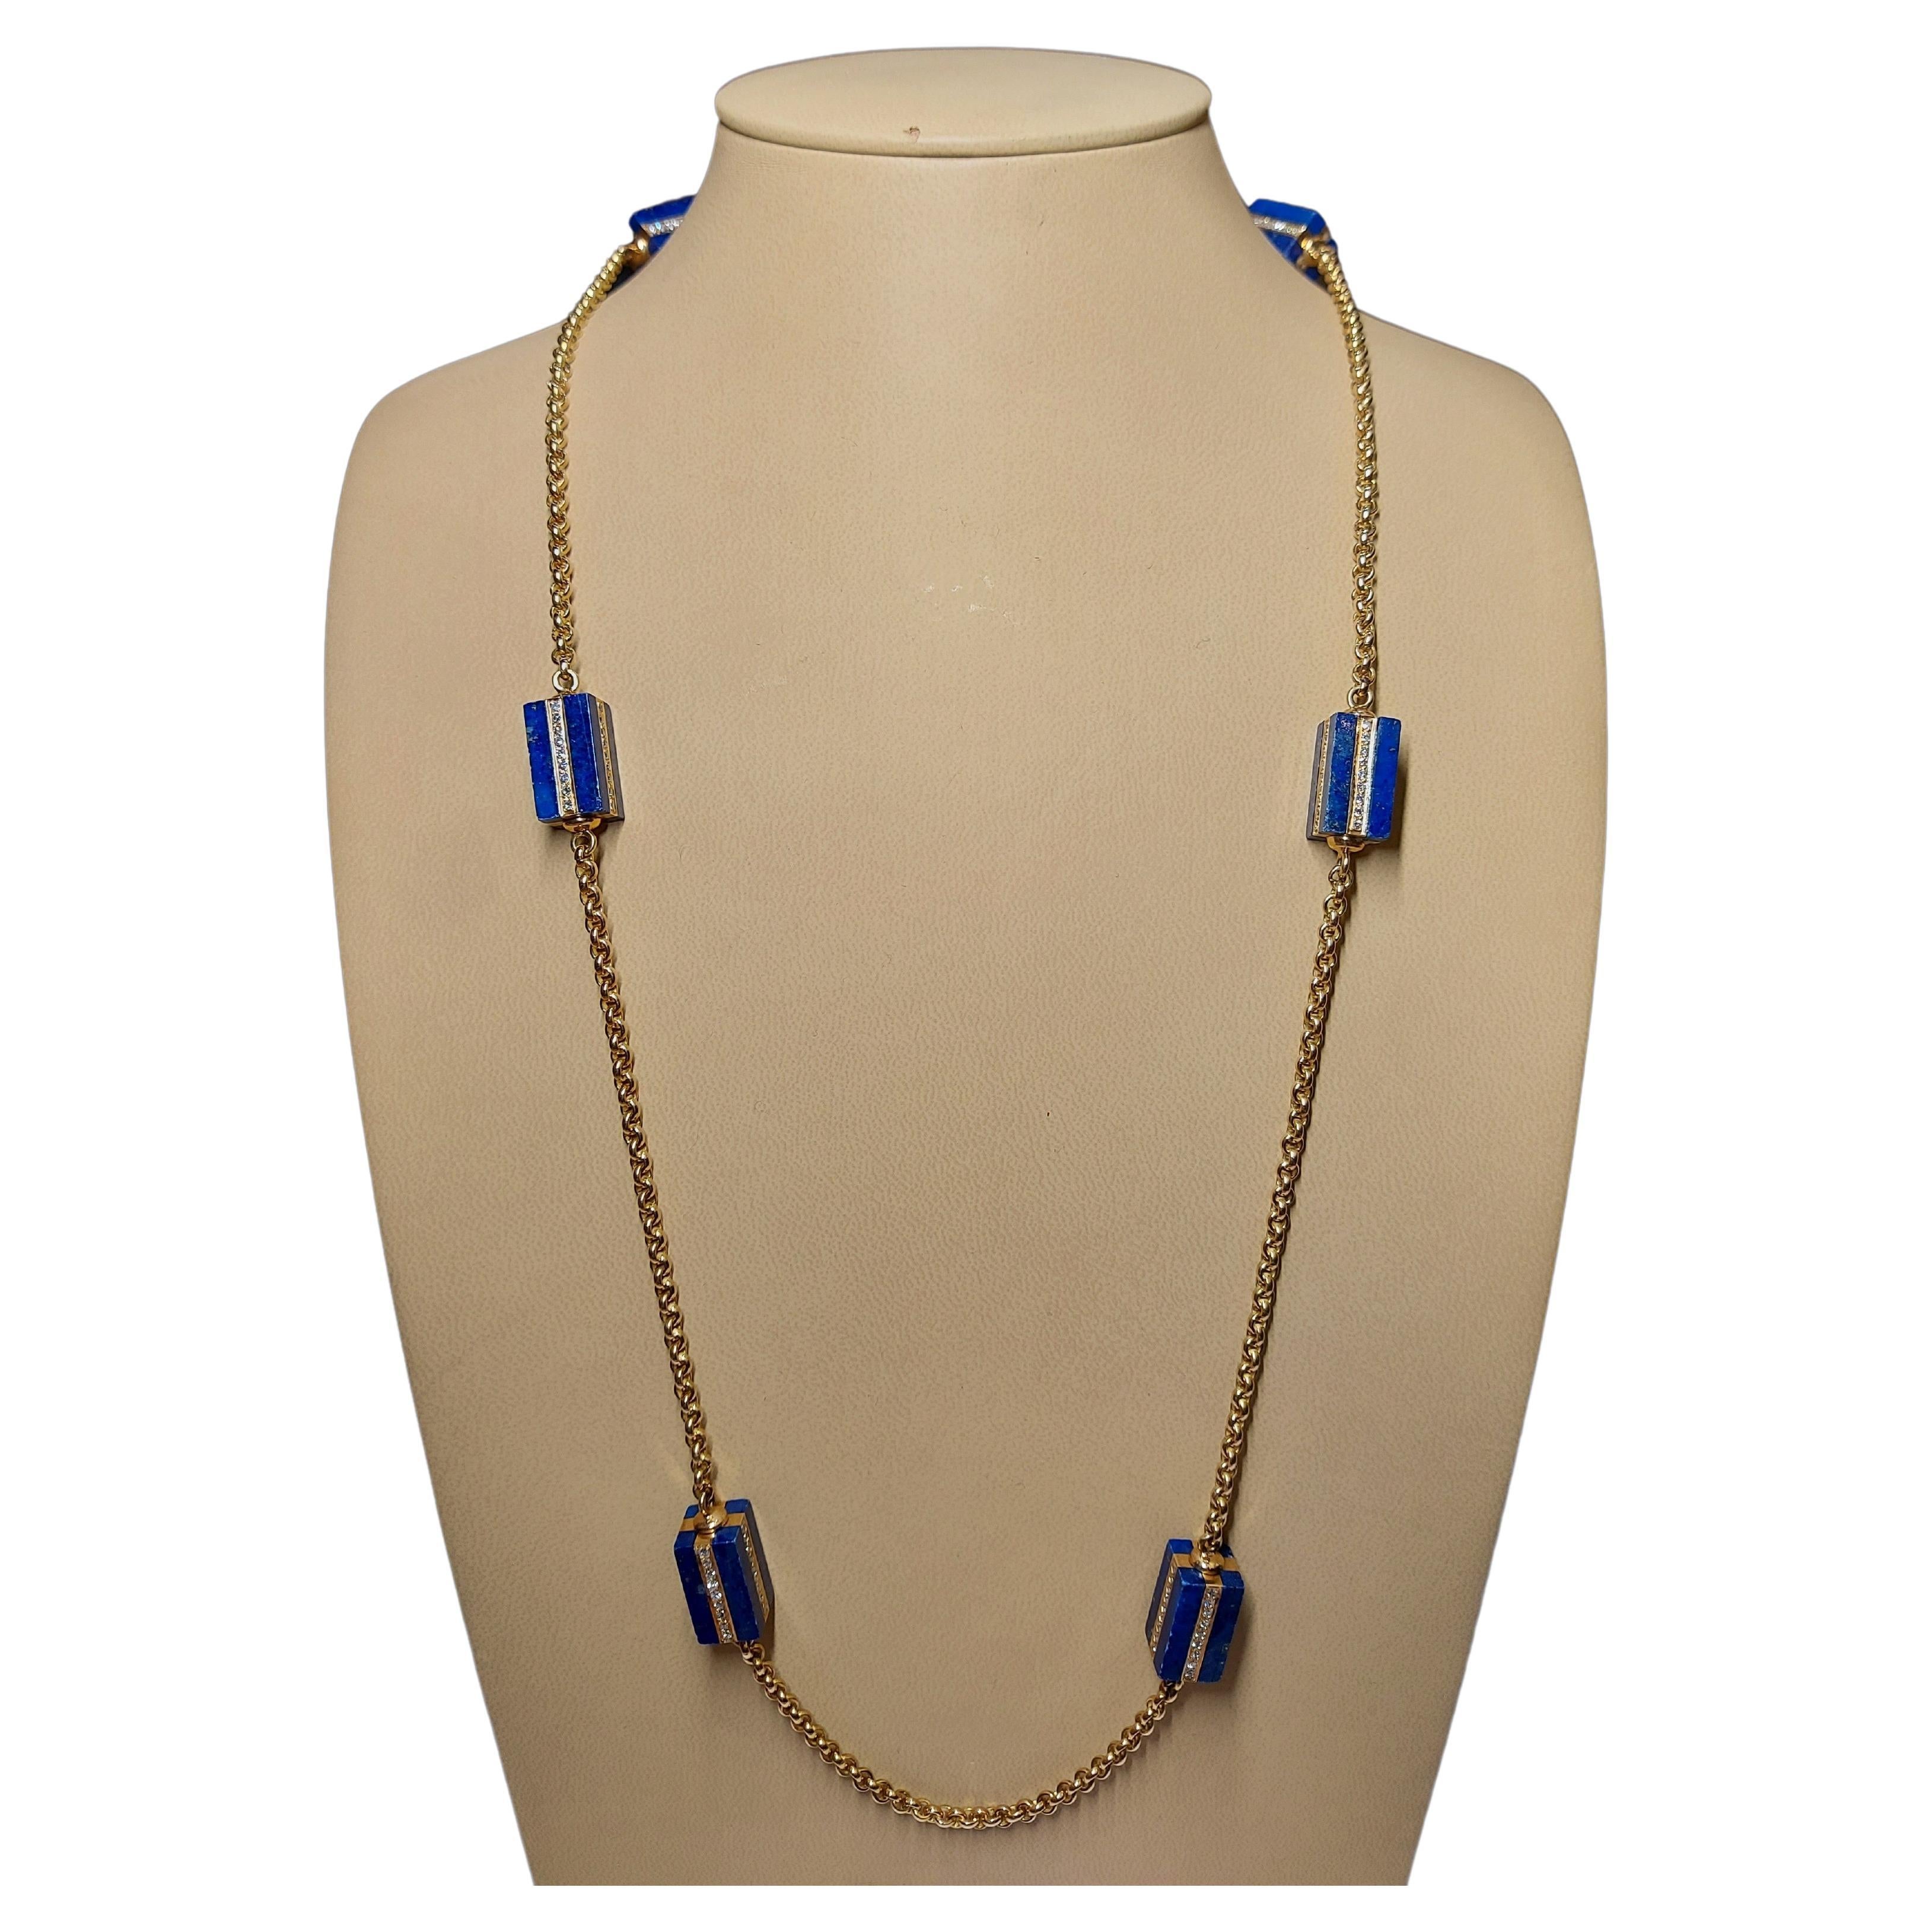 Magnificent Long Necklace with Lapis Lazuli and Diamonds, Estate His Majesty The Sultan Of Oman Qaboos Bin Said

Stone: Rectangle lapis lazuli stone, 19 mm x 10.08 mm x 10.08 mm

Diamonds: 216 diamonds together 4.32ct

Material: 18kt Yellow